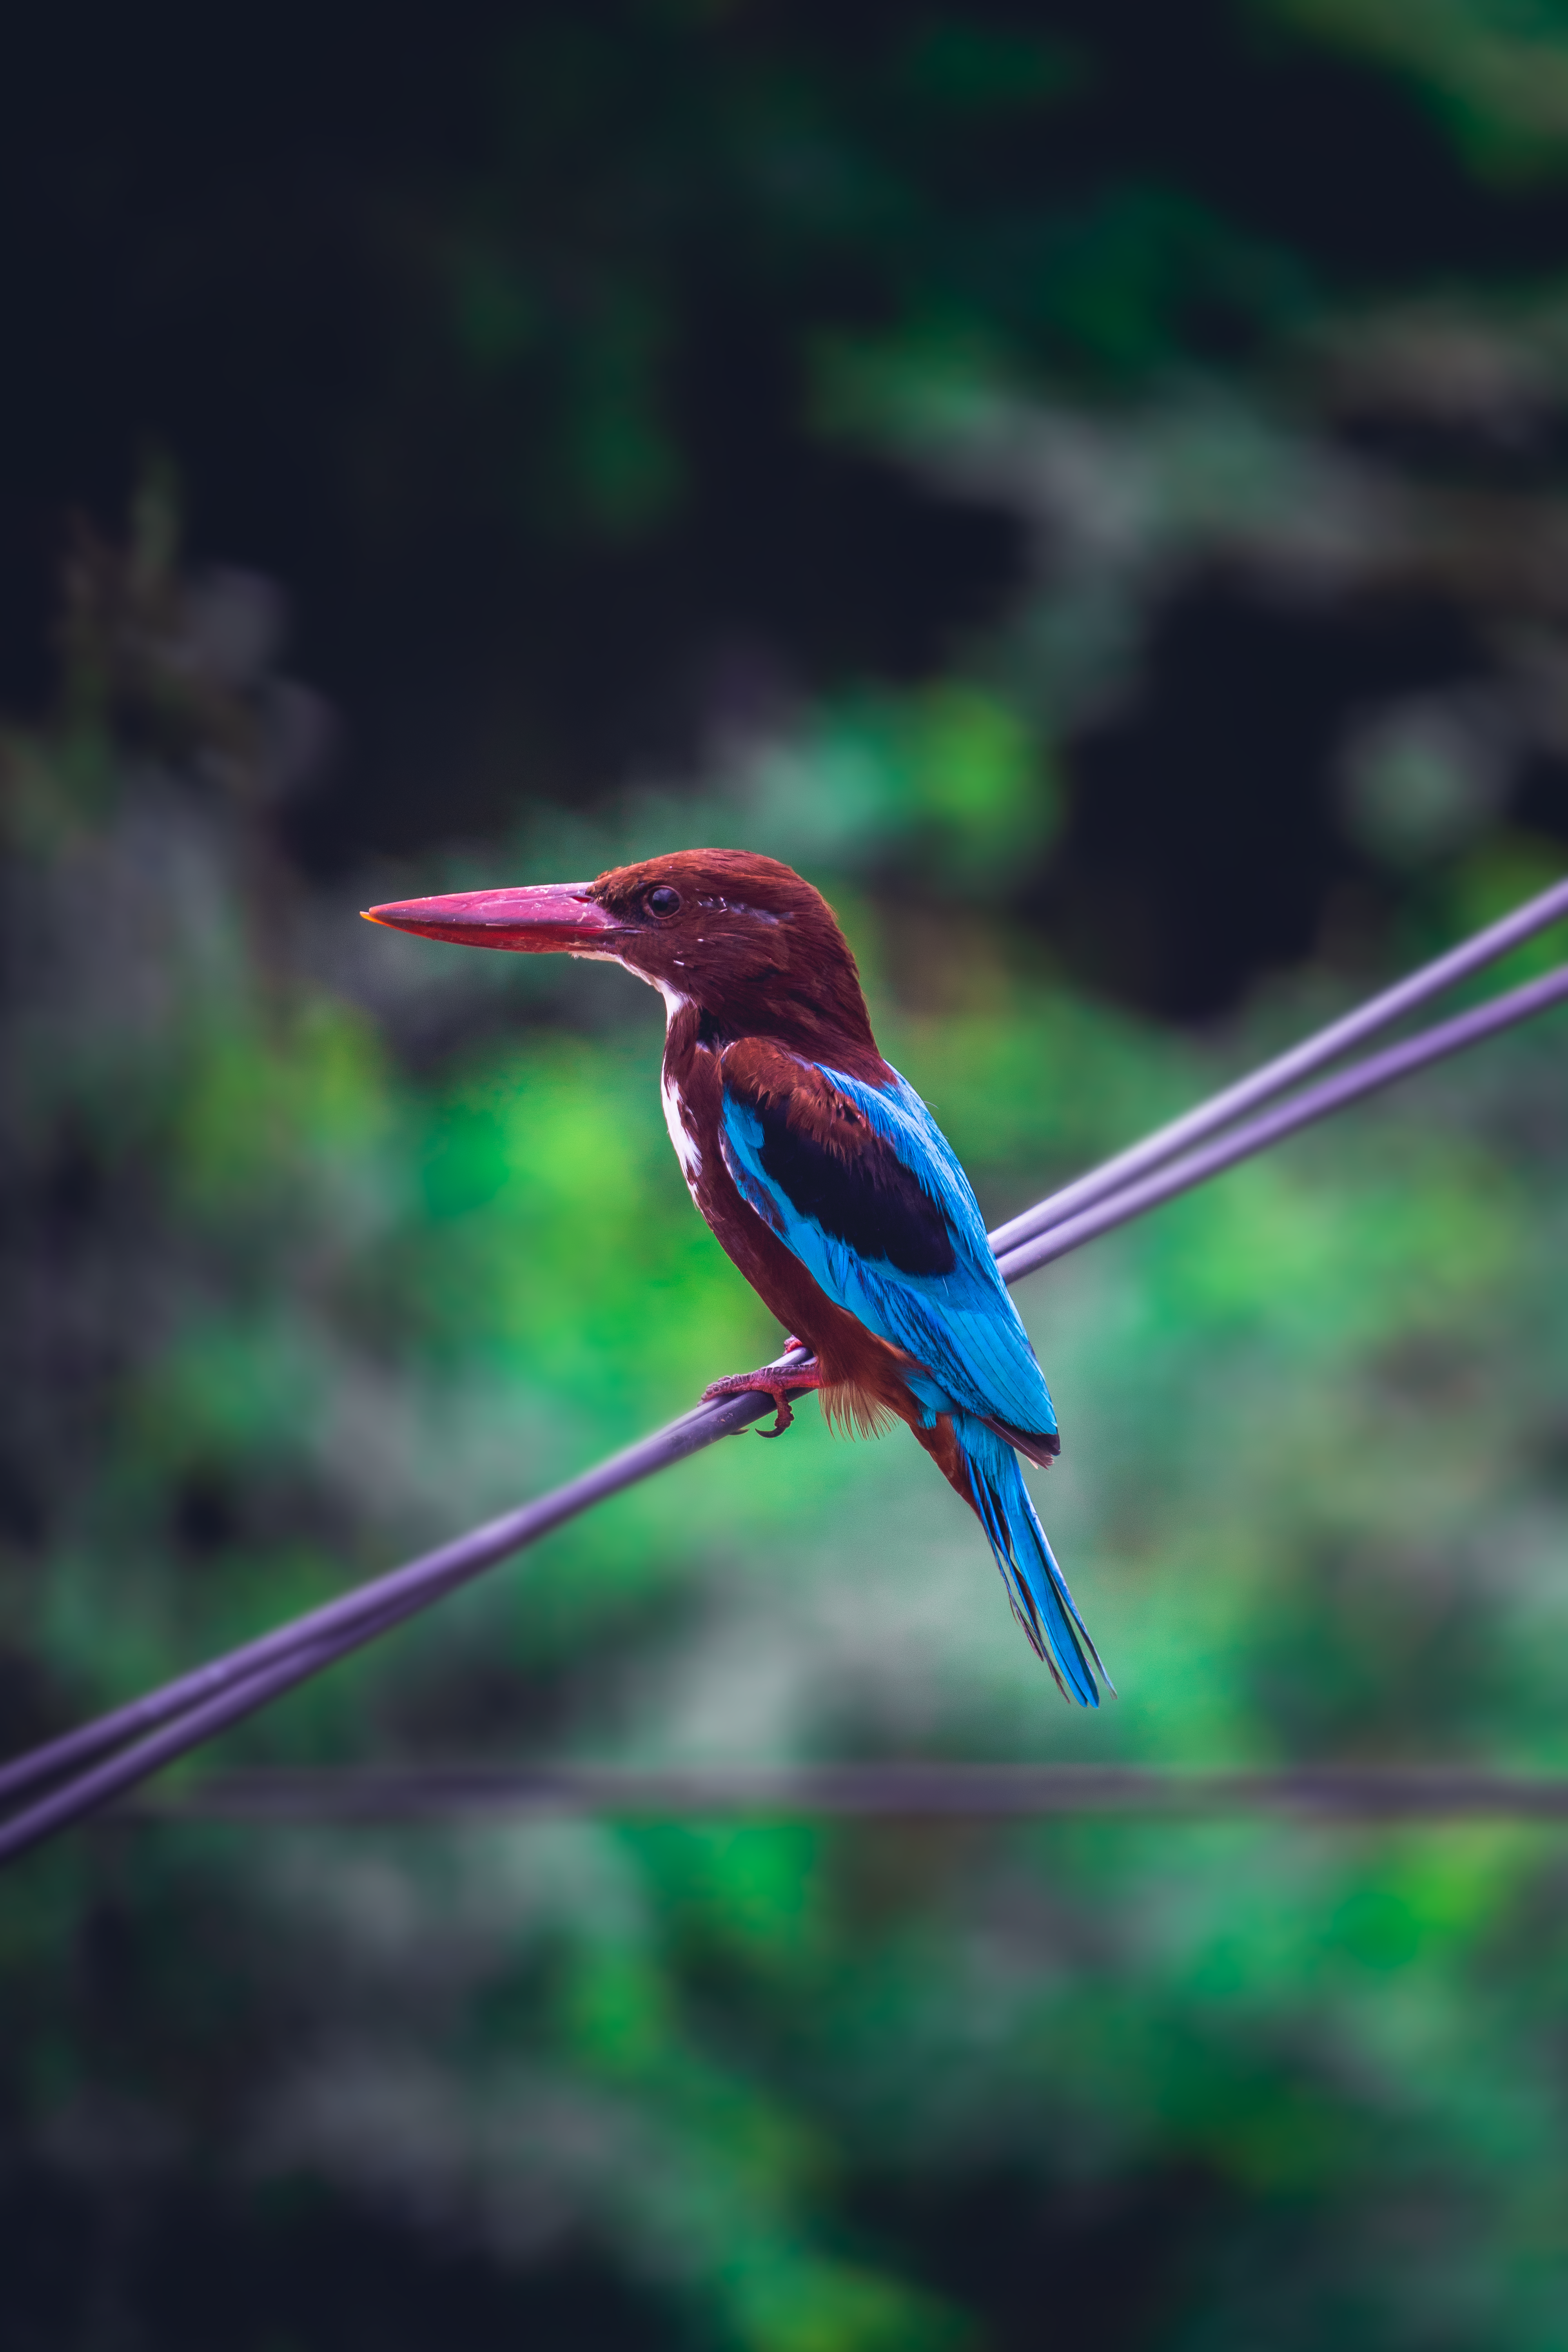 Kingfisher on a wire